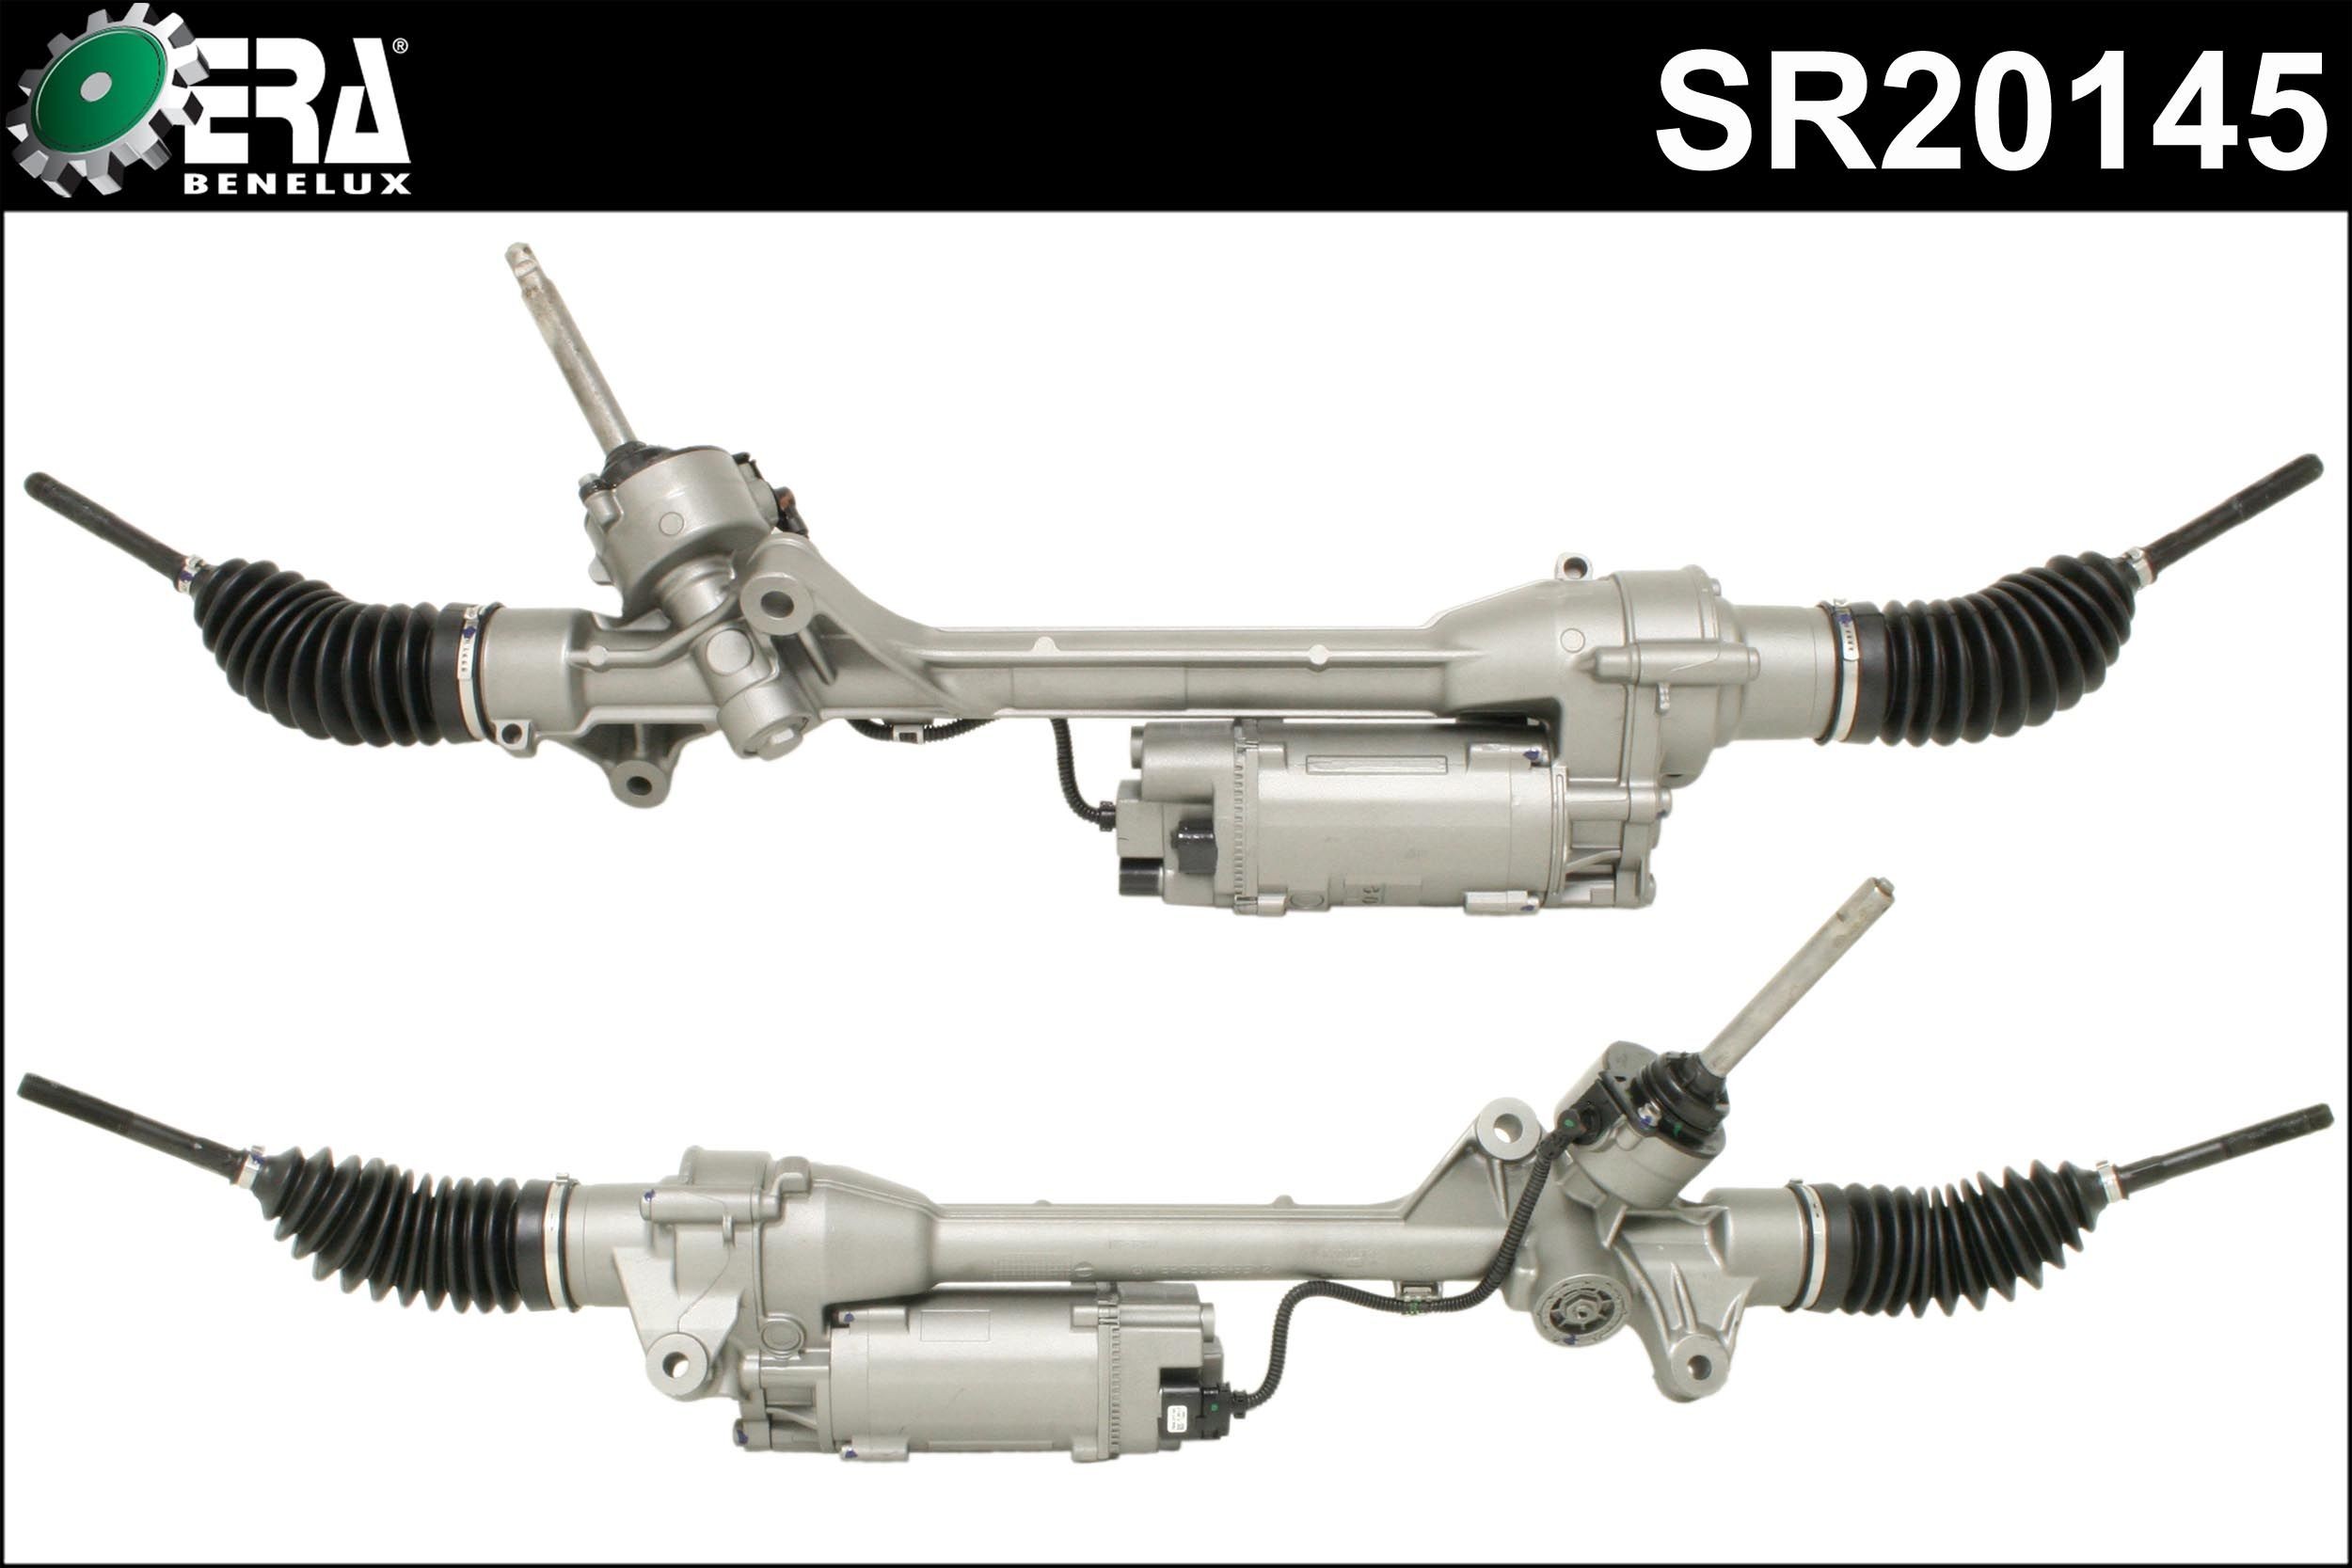 Mercedes M-Class Rack and pinion 18760268 ERA Benelux SR20145 online buy